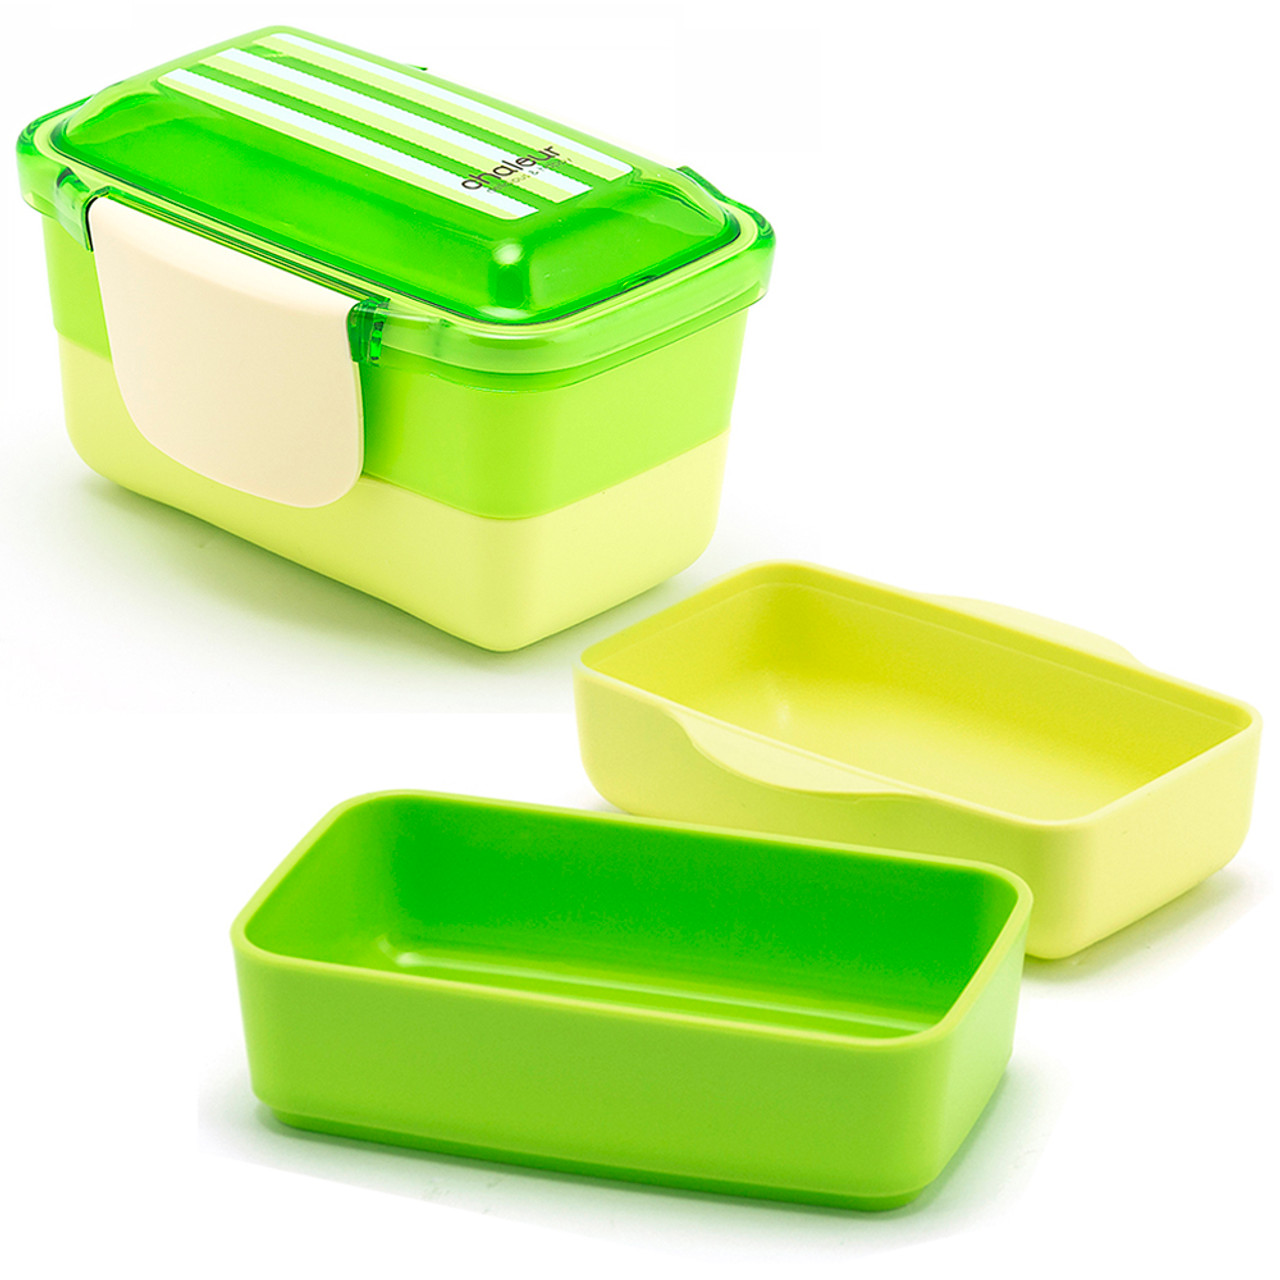 https://cdn11.bigcommerce.com/s-7hhule/images/stencil/1280x1280/products/805/2063/668743_Bento_2Tier_Lunch_Box_Green_merae__46016.1458669467.jpg?c=2